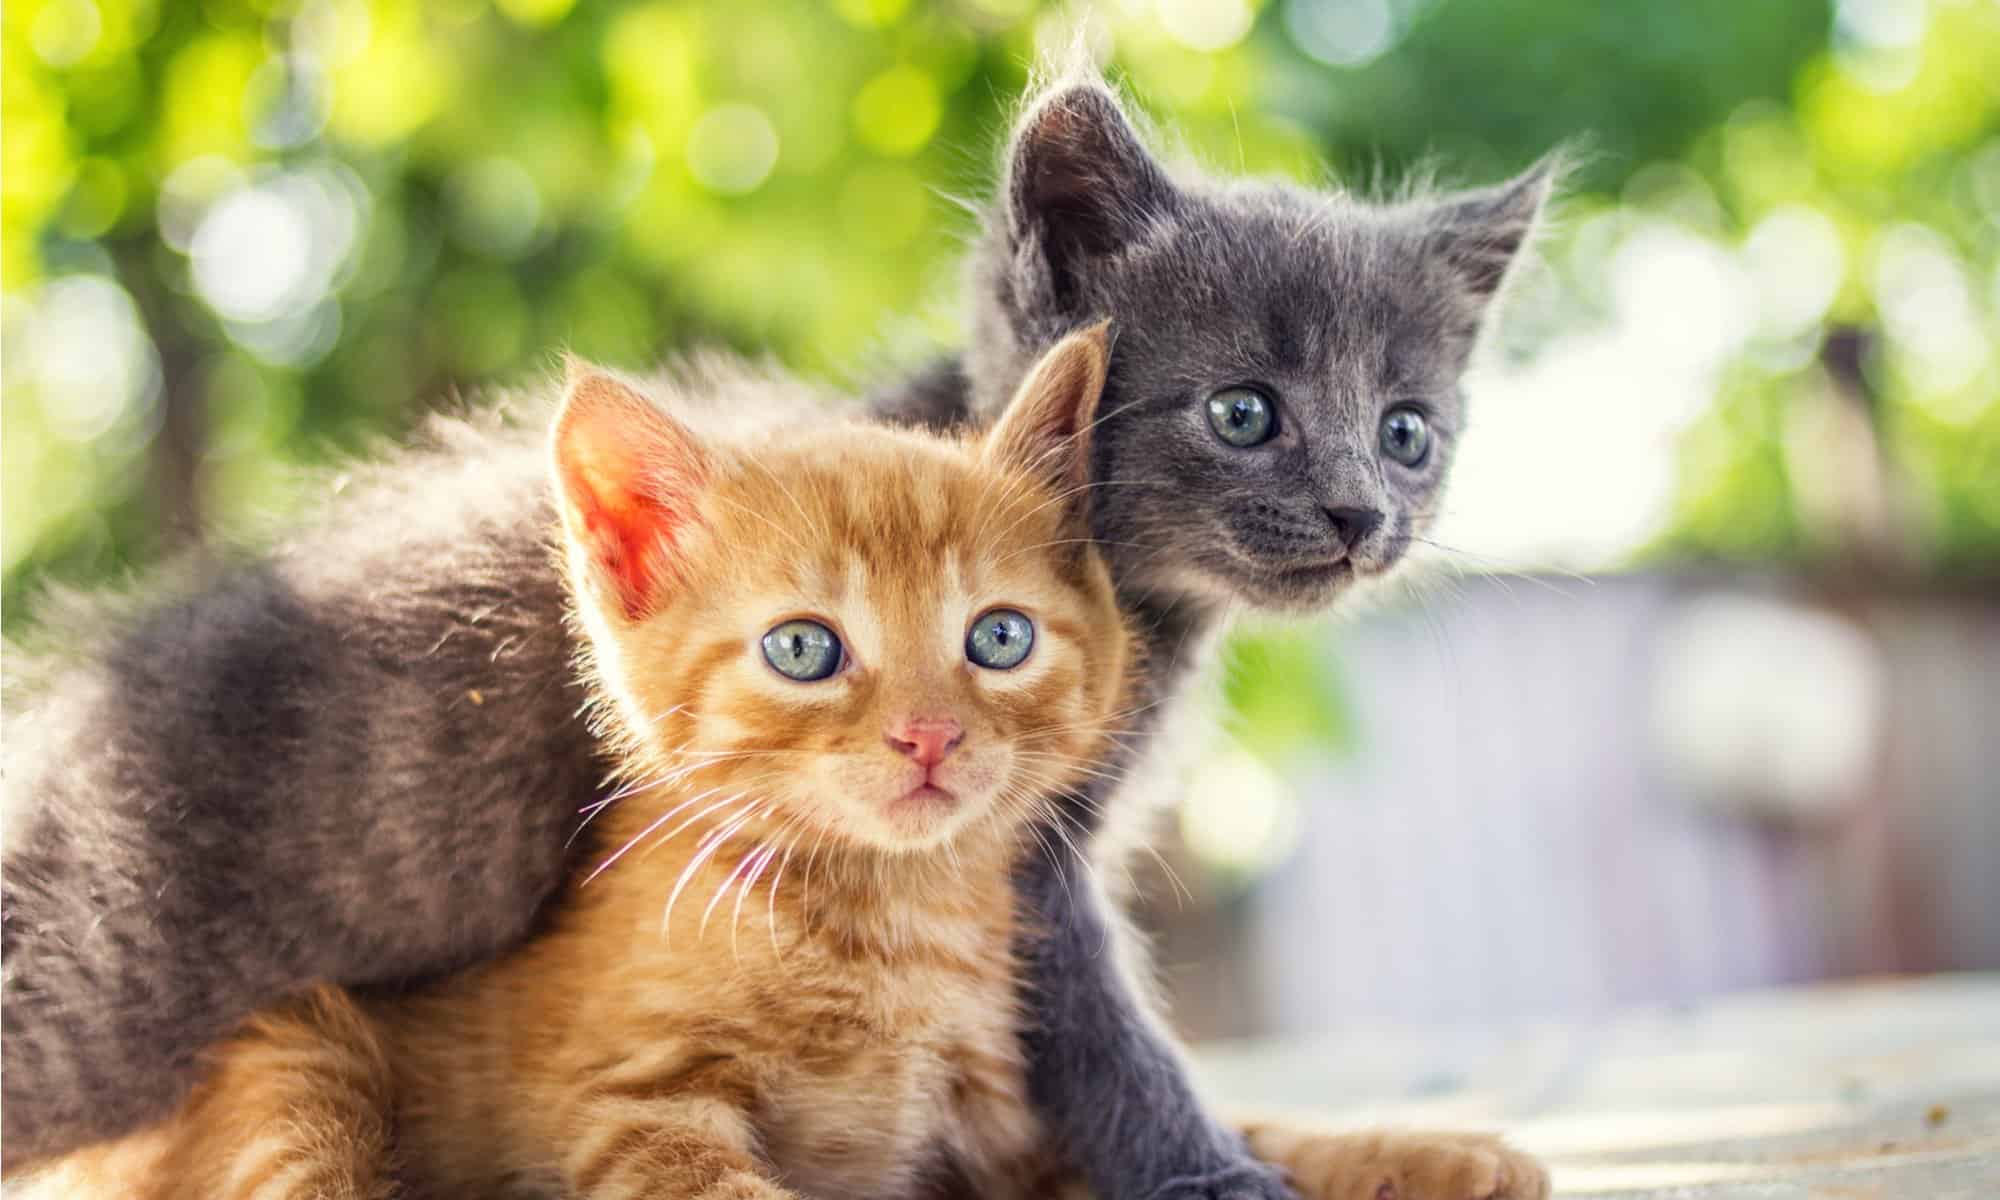 Two adorable kittens playing together.